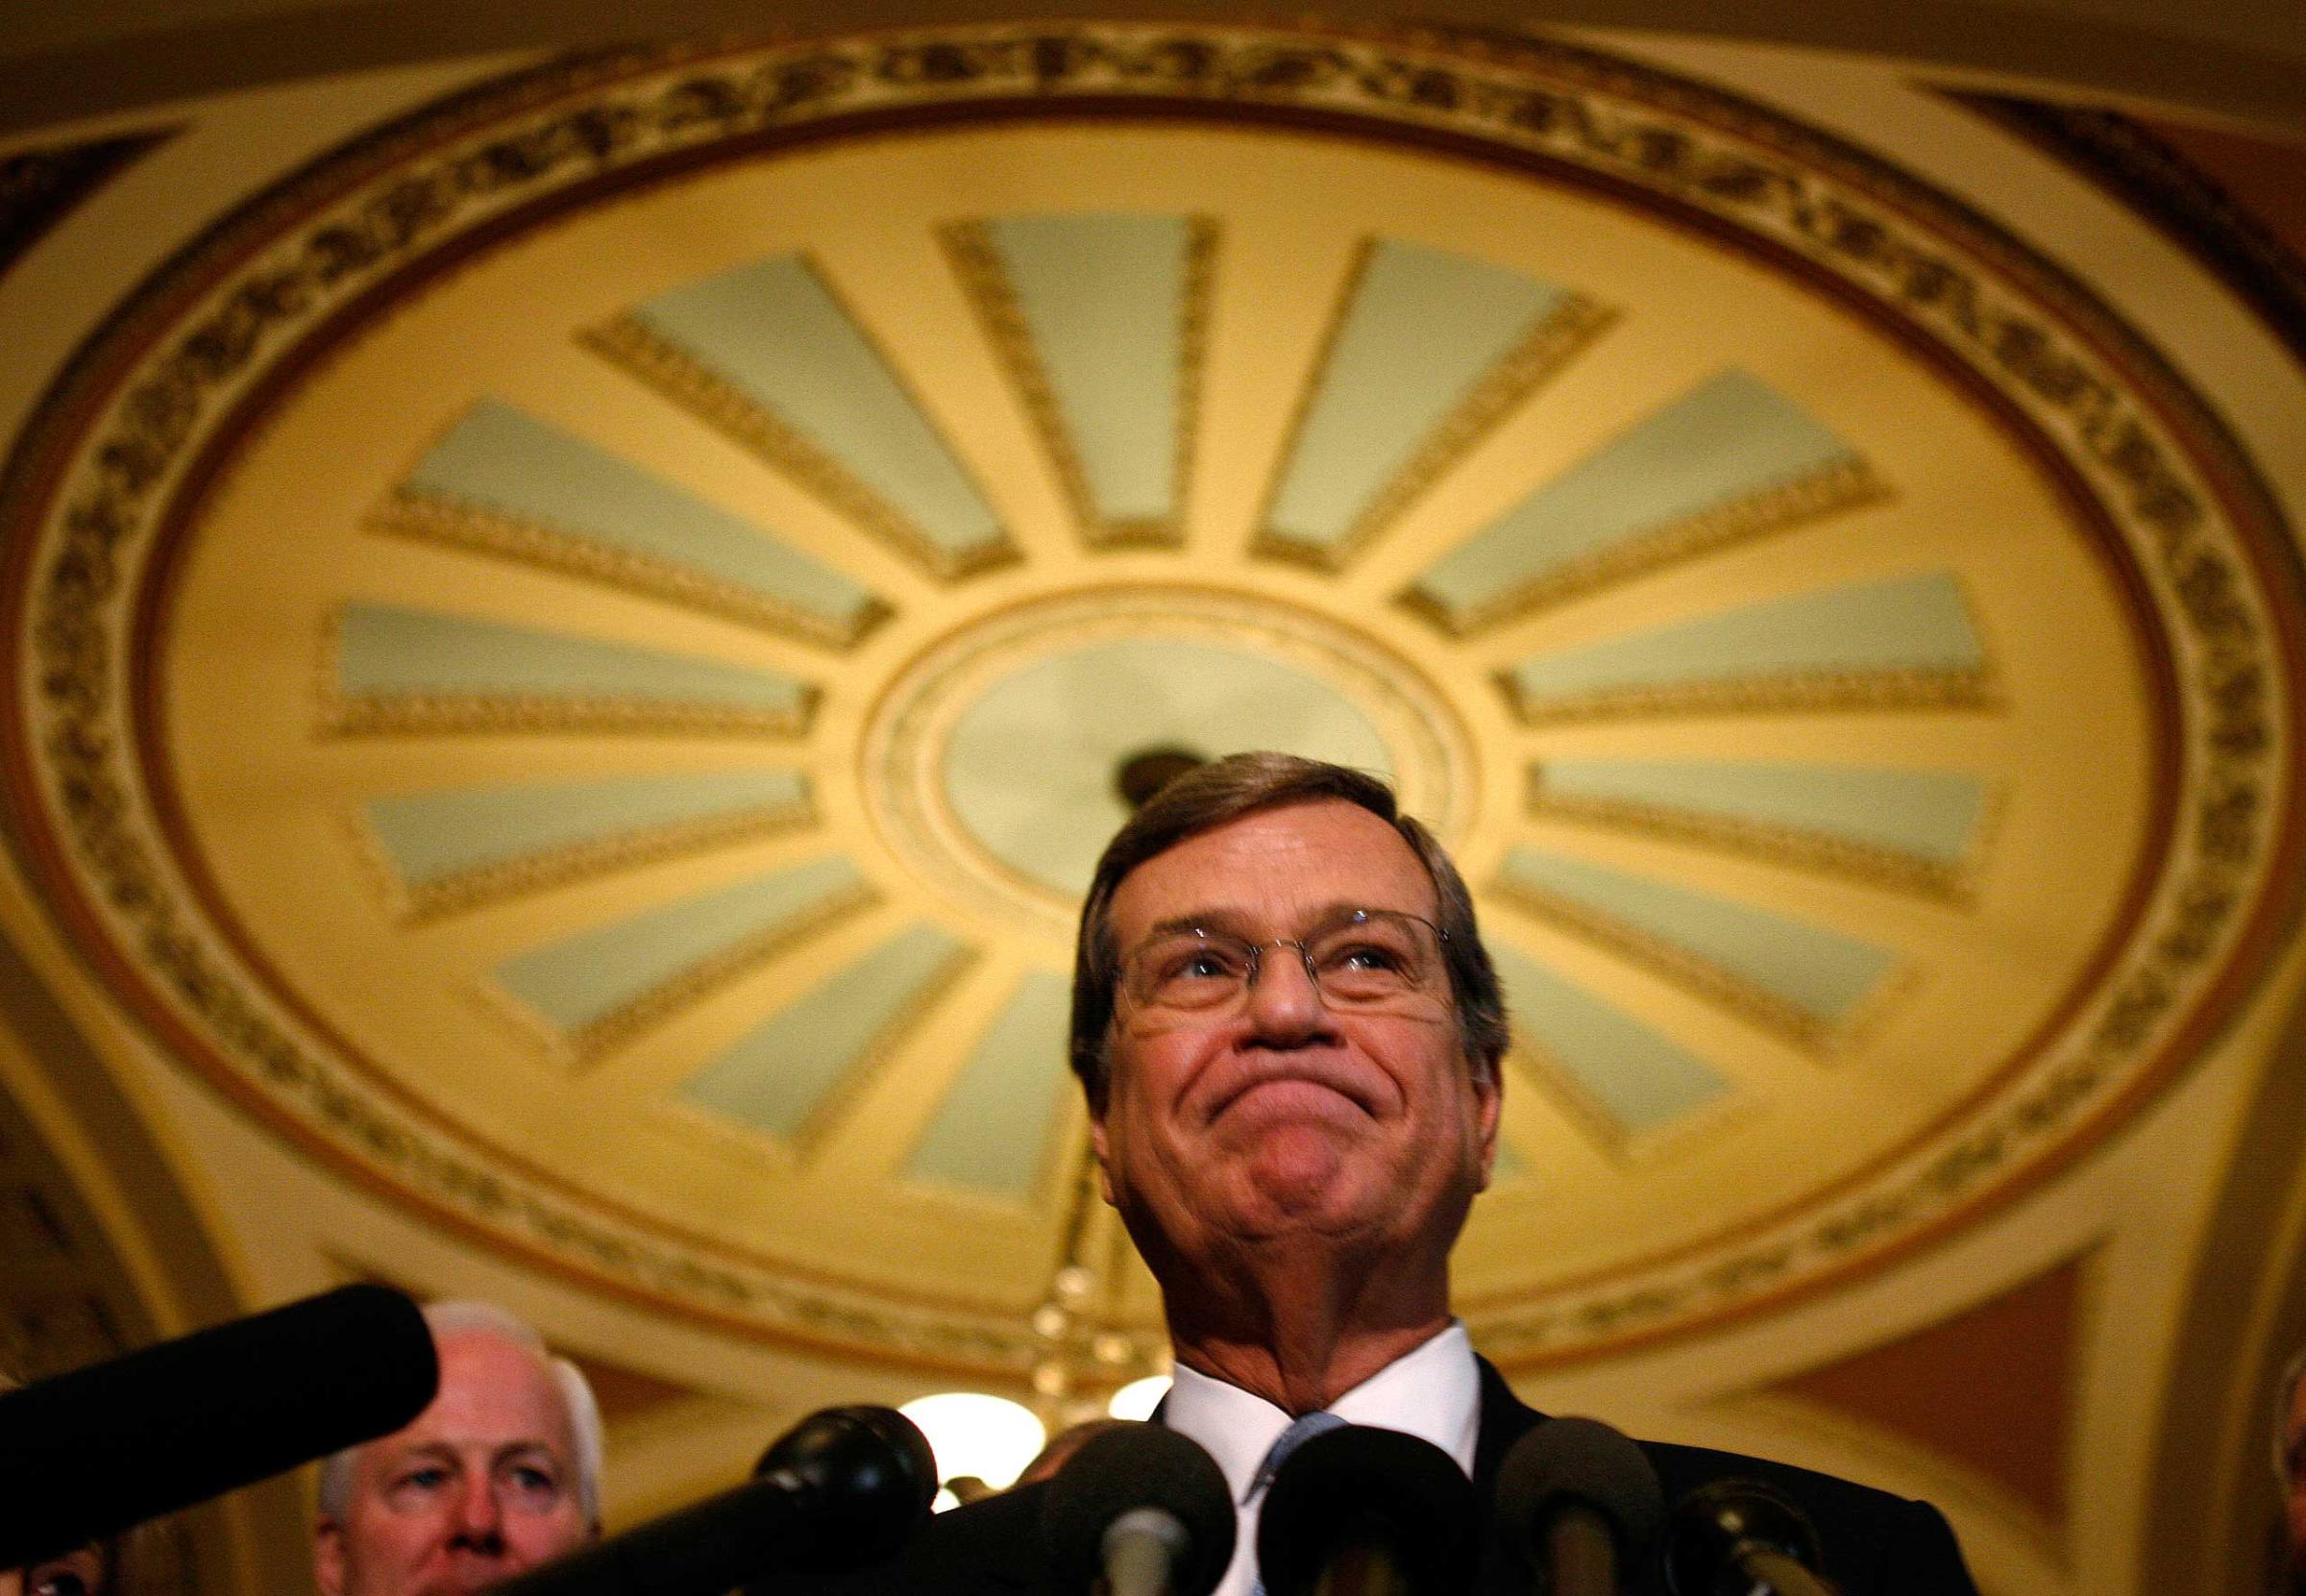 Newly-elected U.S. Senate Republican Whip Trent Lott (R-MS) is pictured following secret voting for the new Senate Reblican leadership on Capitol Hill in Washington November 15, 2006. Lott resigned as House majority leader in 2002 during a controversy over remarks that were seen as racially insensitive. REUTERS/Jason Reed (UNITED STATES) - RTR1JD3F